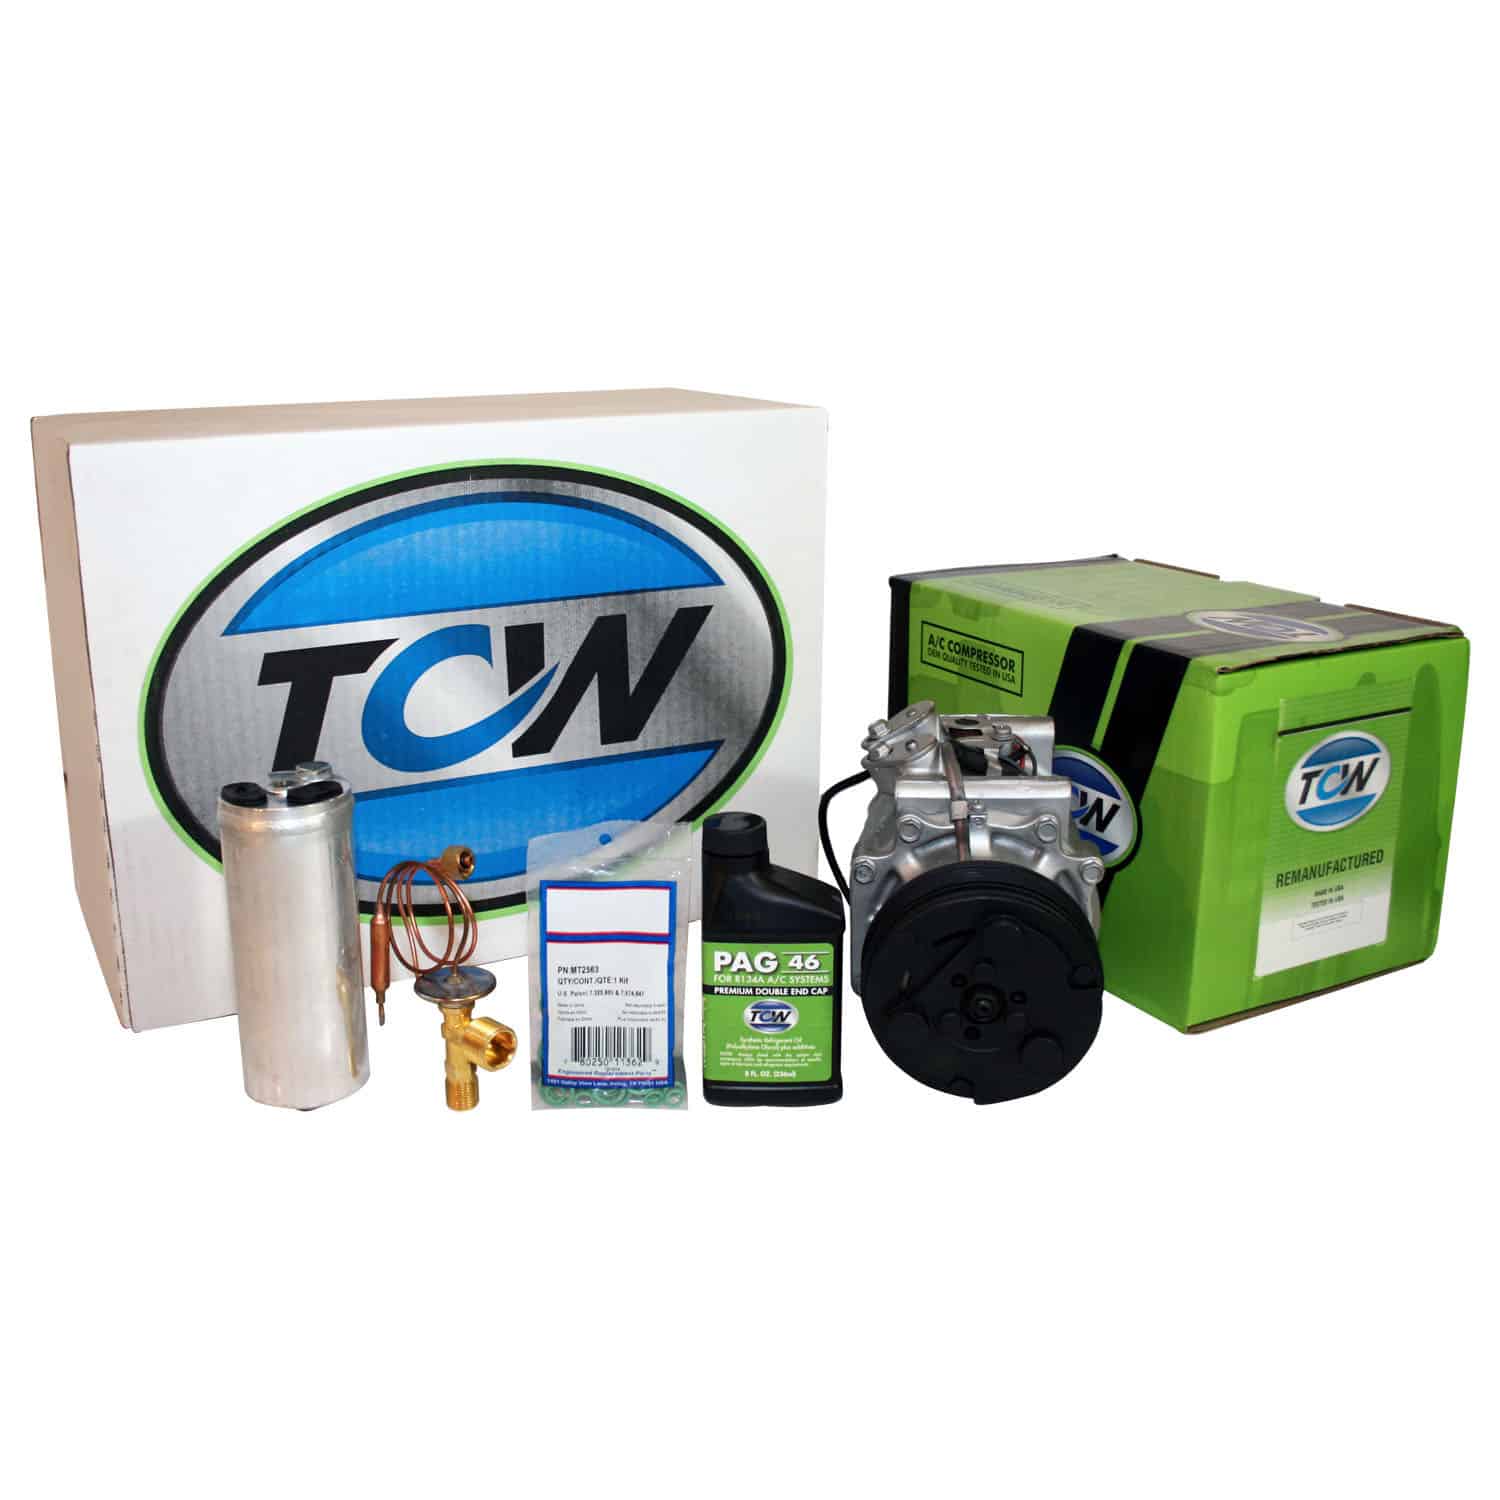 TCW Vehicle A/C Kit K1000307R Remanufactured Product Image field_60b6a13a6e67c